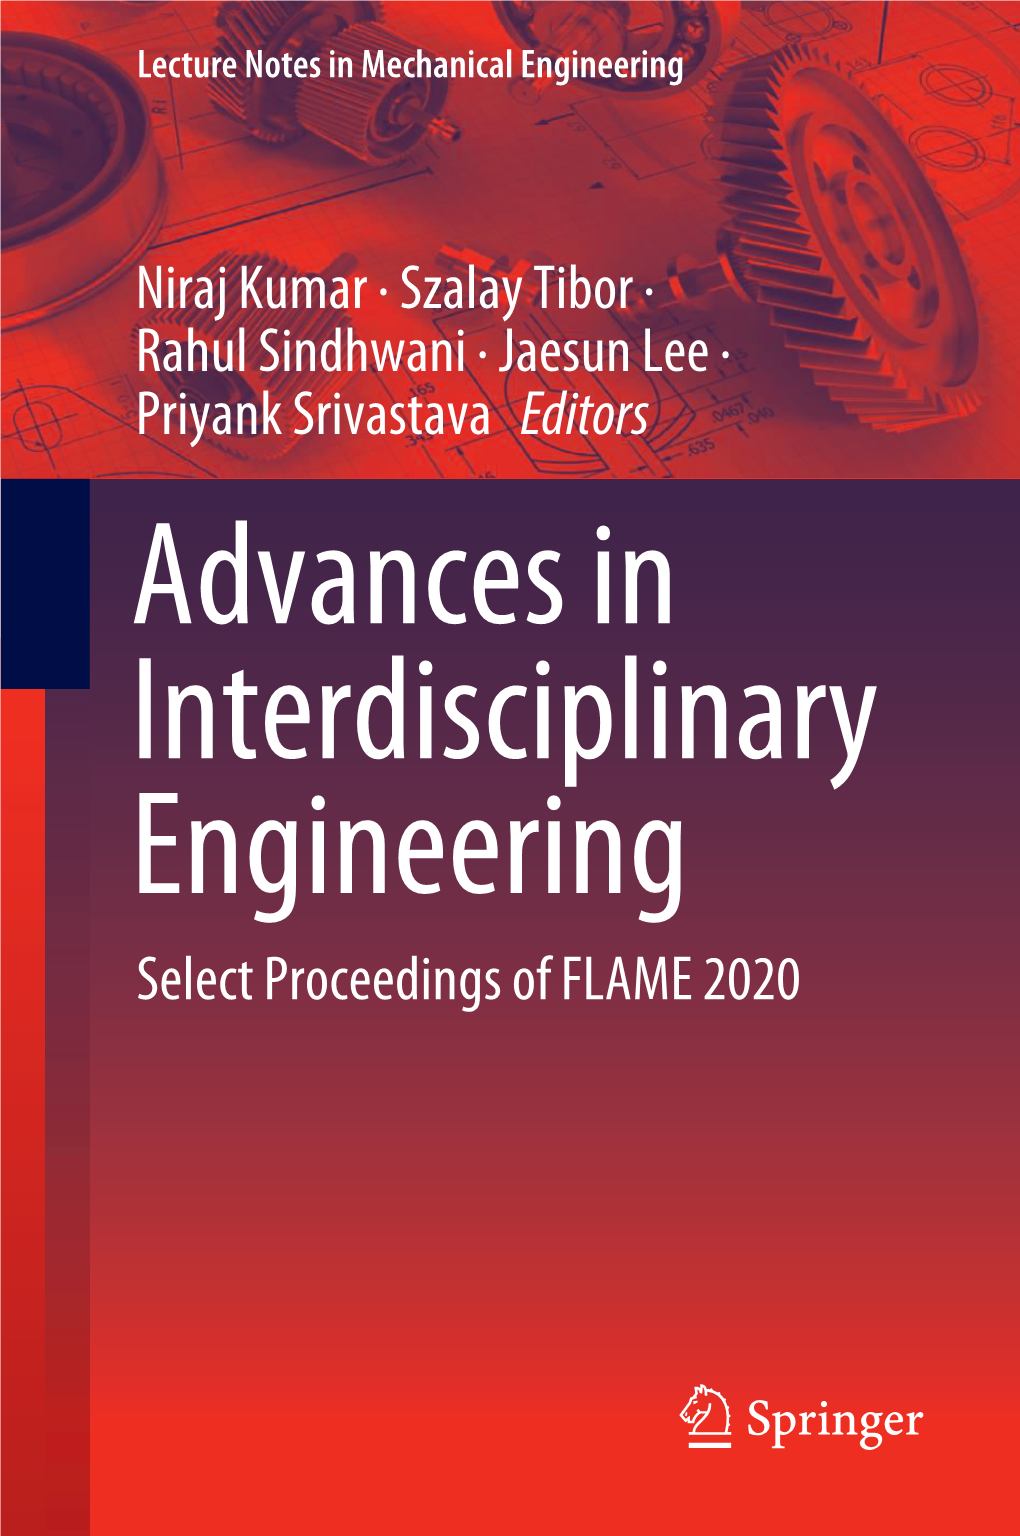 Advances in Interdisciplinary Engineering Select Proceedings of FLAME 2020 Lecture Notes in Mechanical Engineering